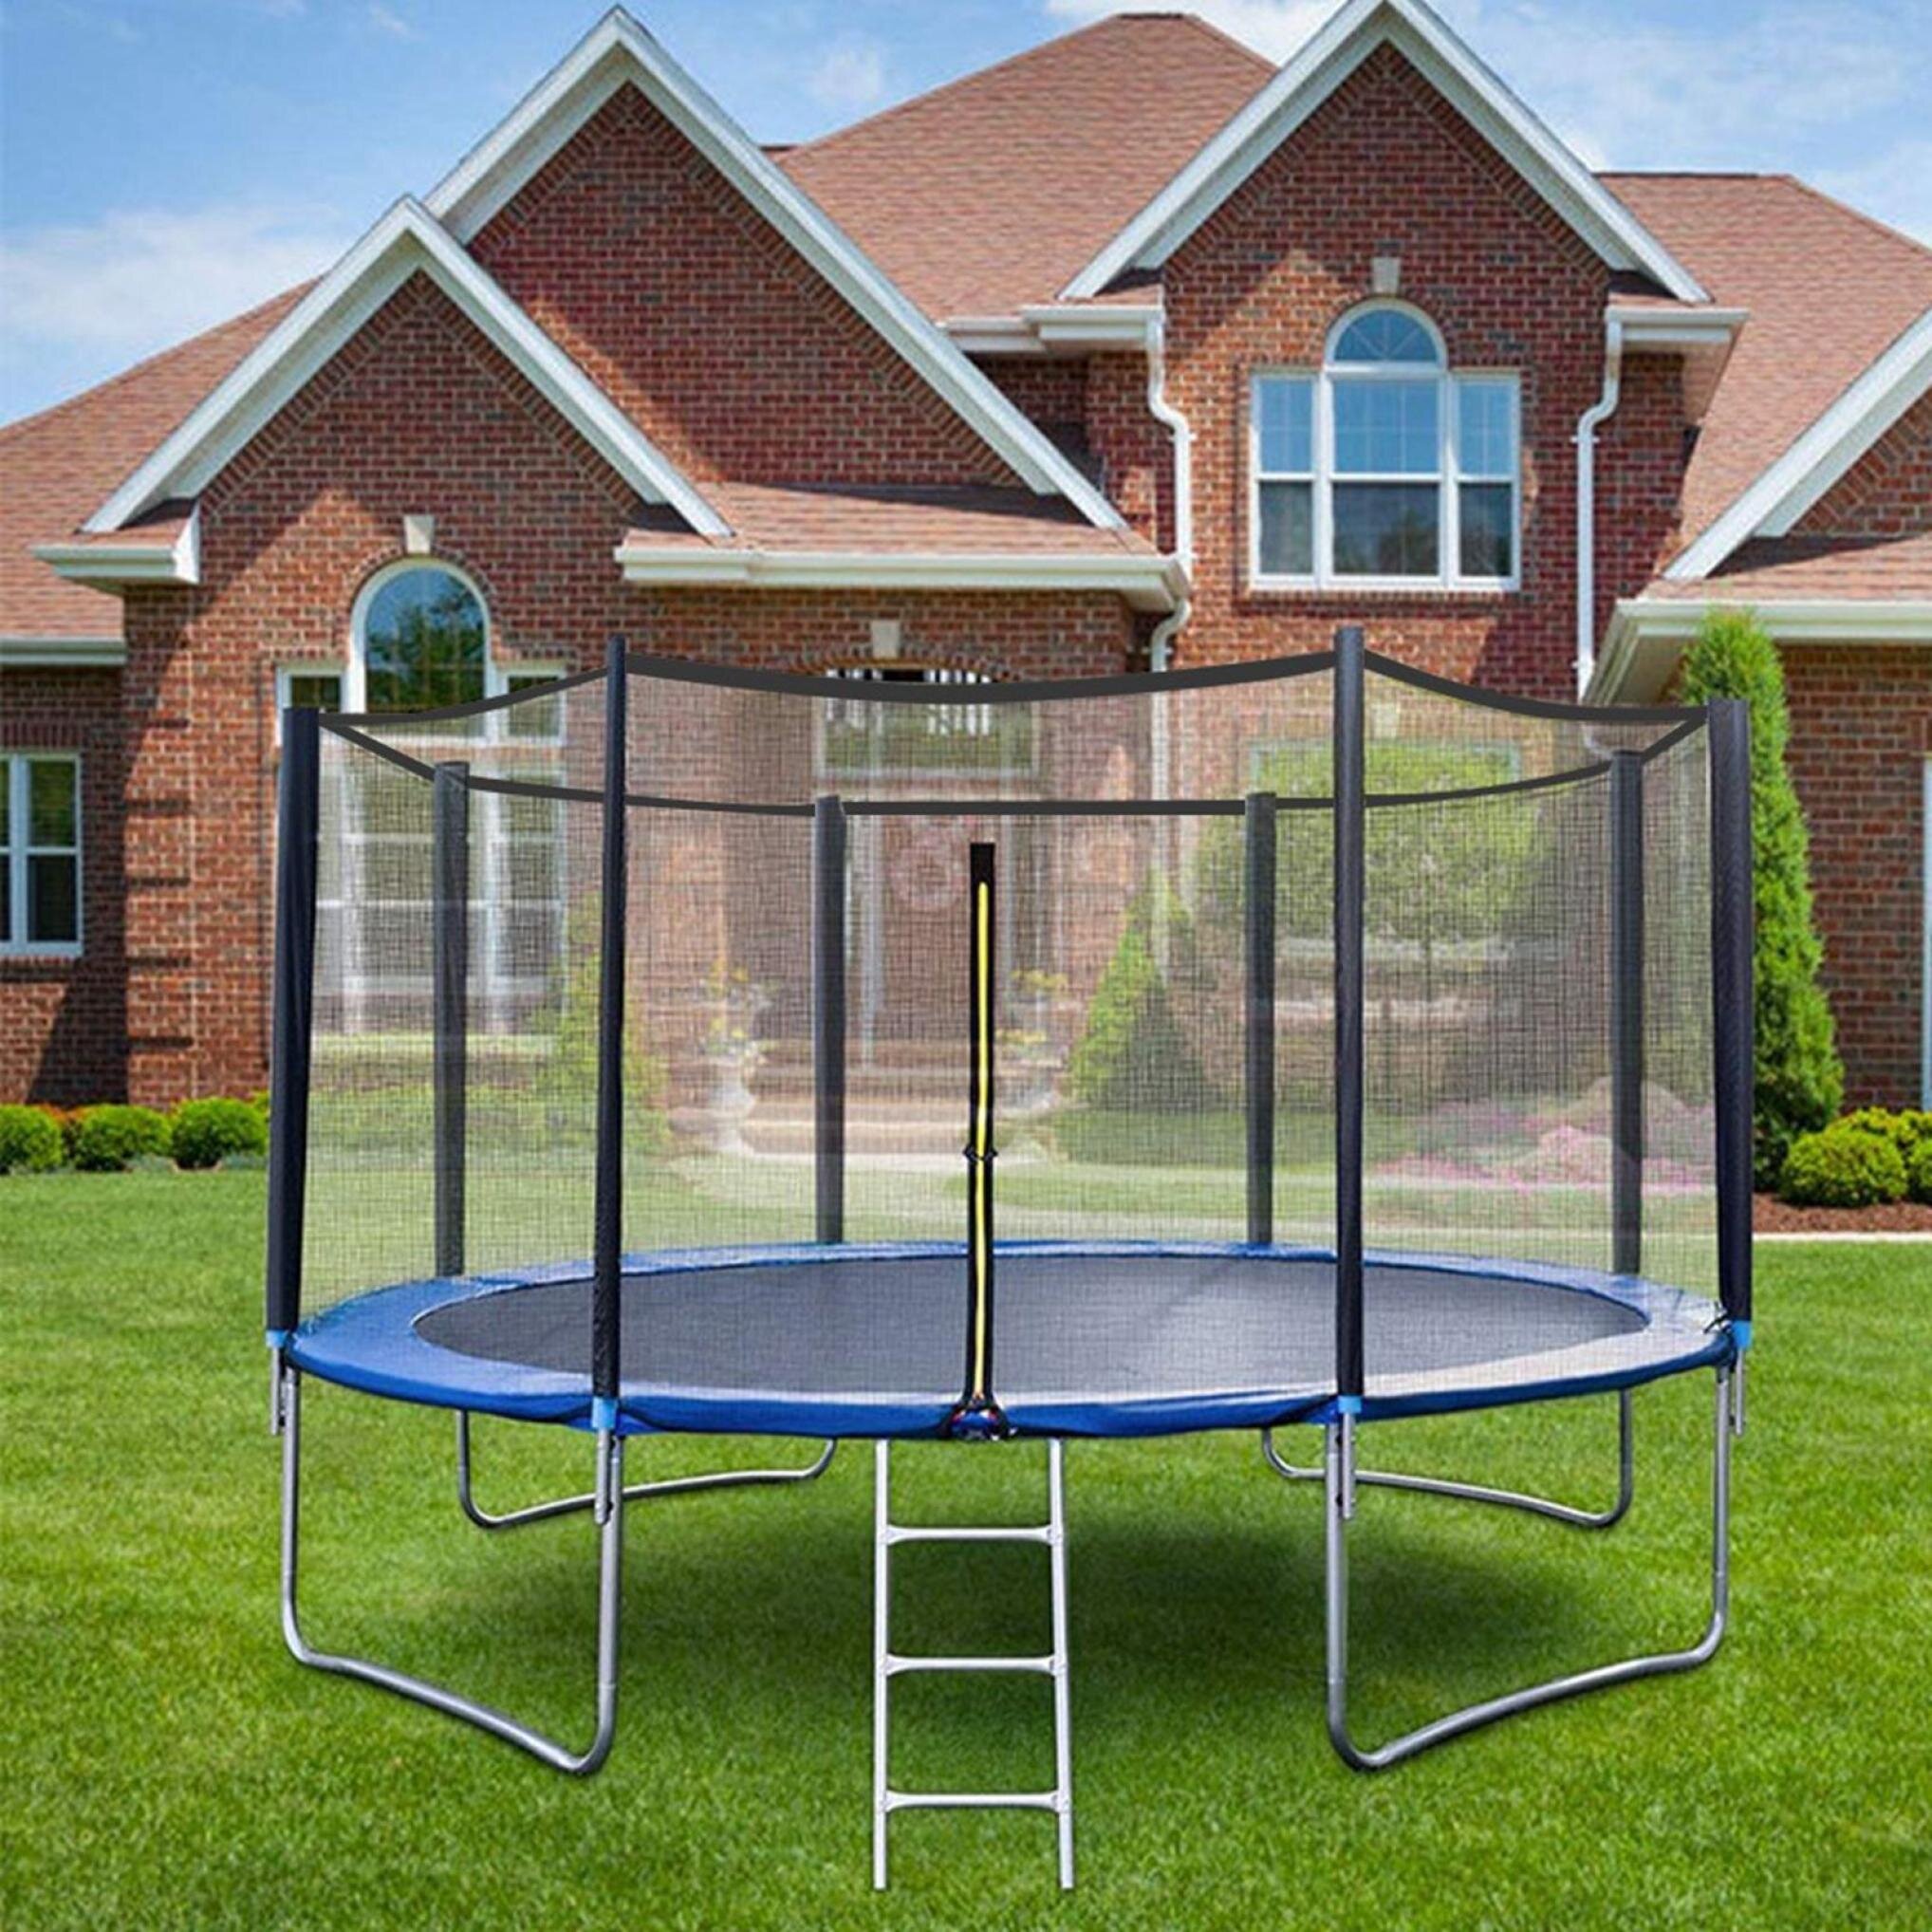 Amlaiworld 12 FT Kids Trampoline with Enclosure Net Jumping Mat and Spring Cover Padding Outdoor Trampolines 